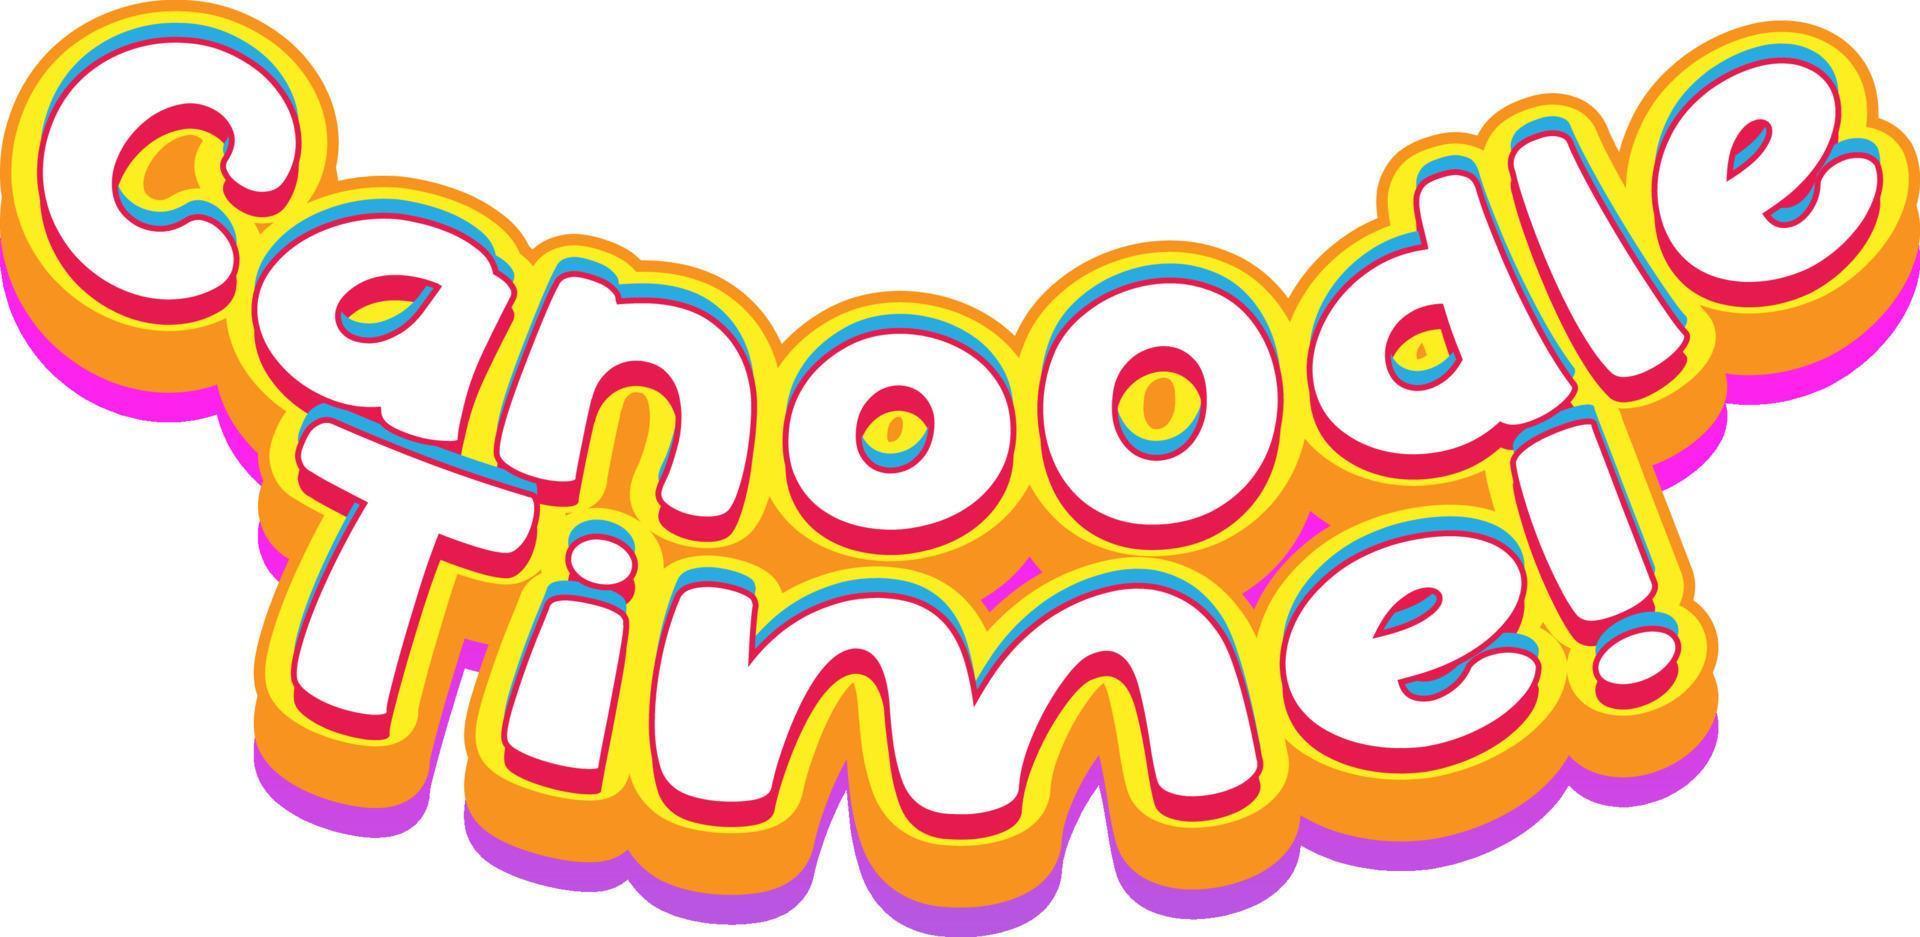 Canoodle time isolated word text vector